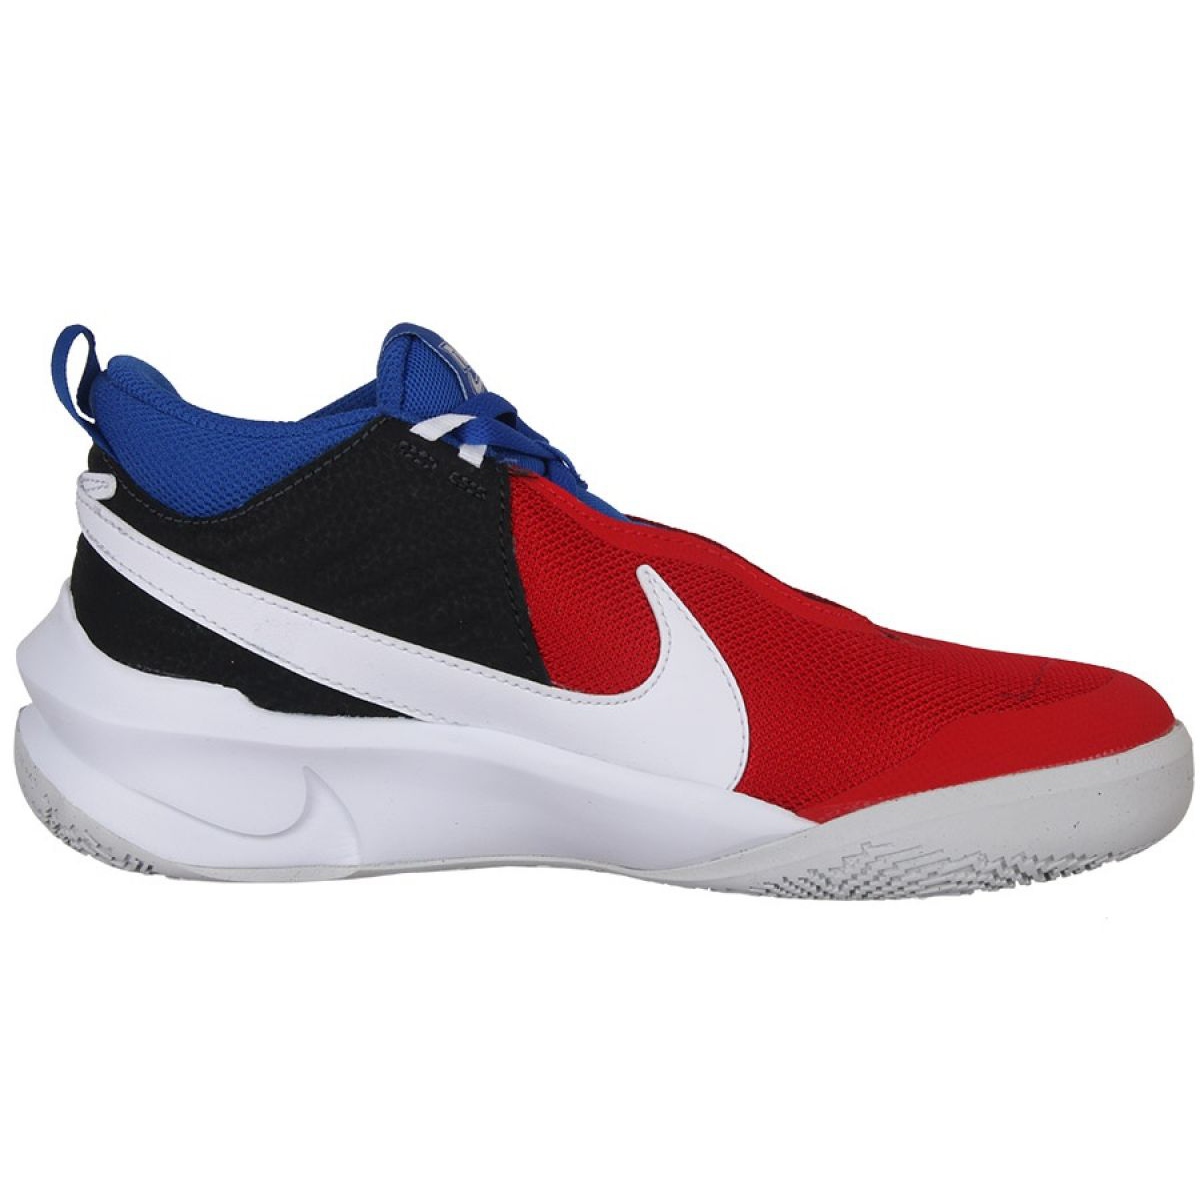 red and navy nike shoes